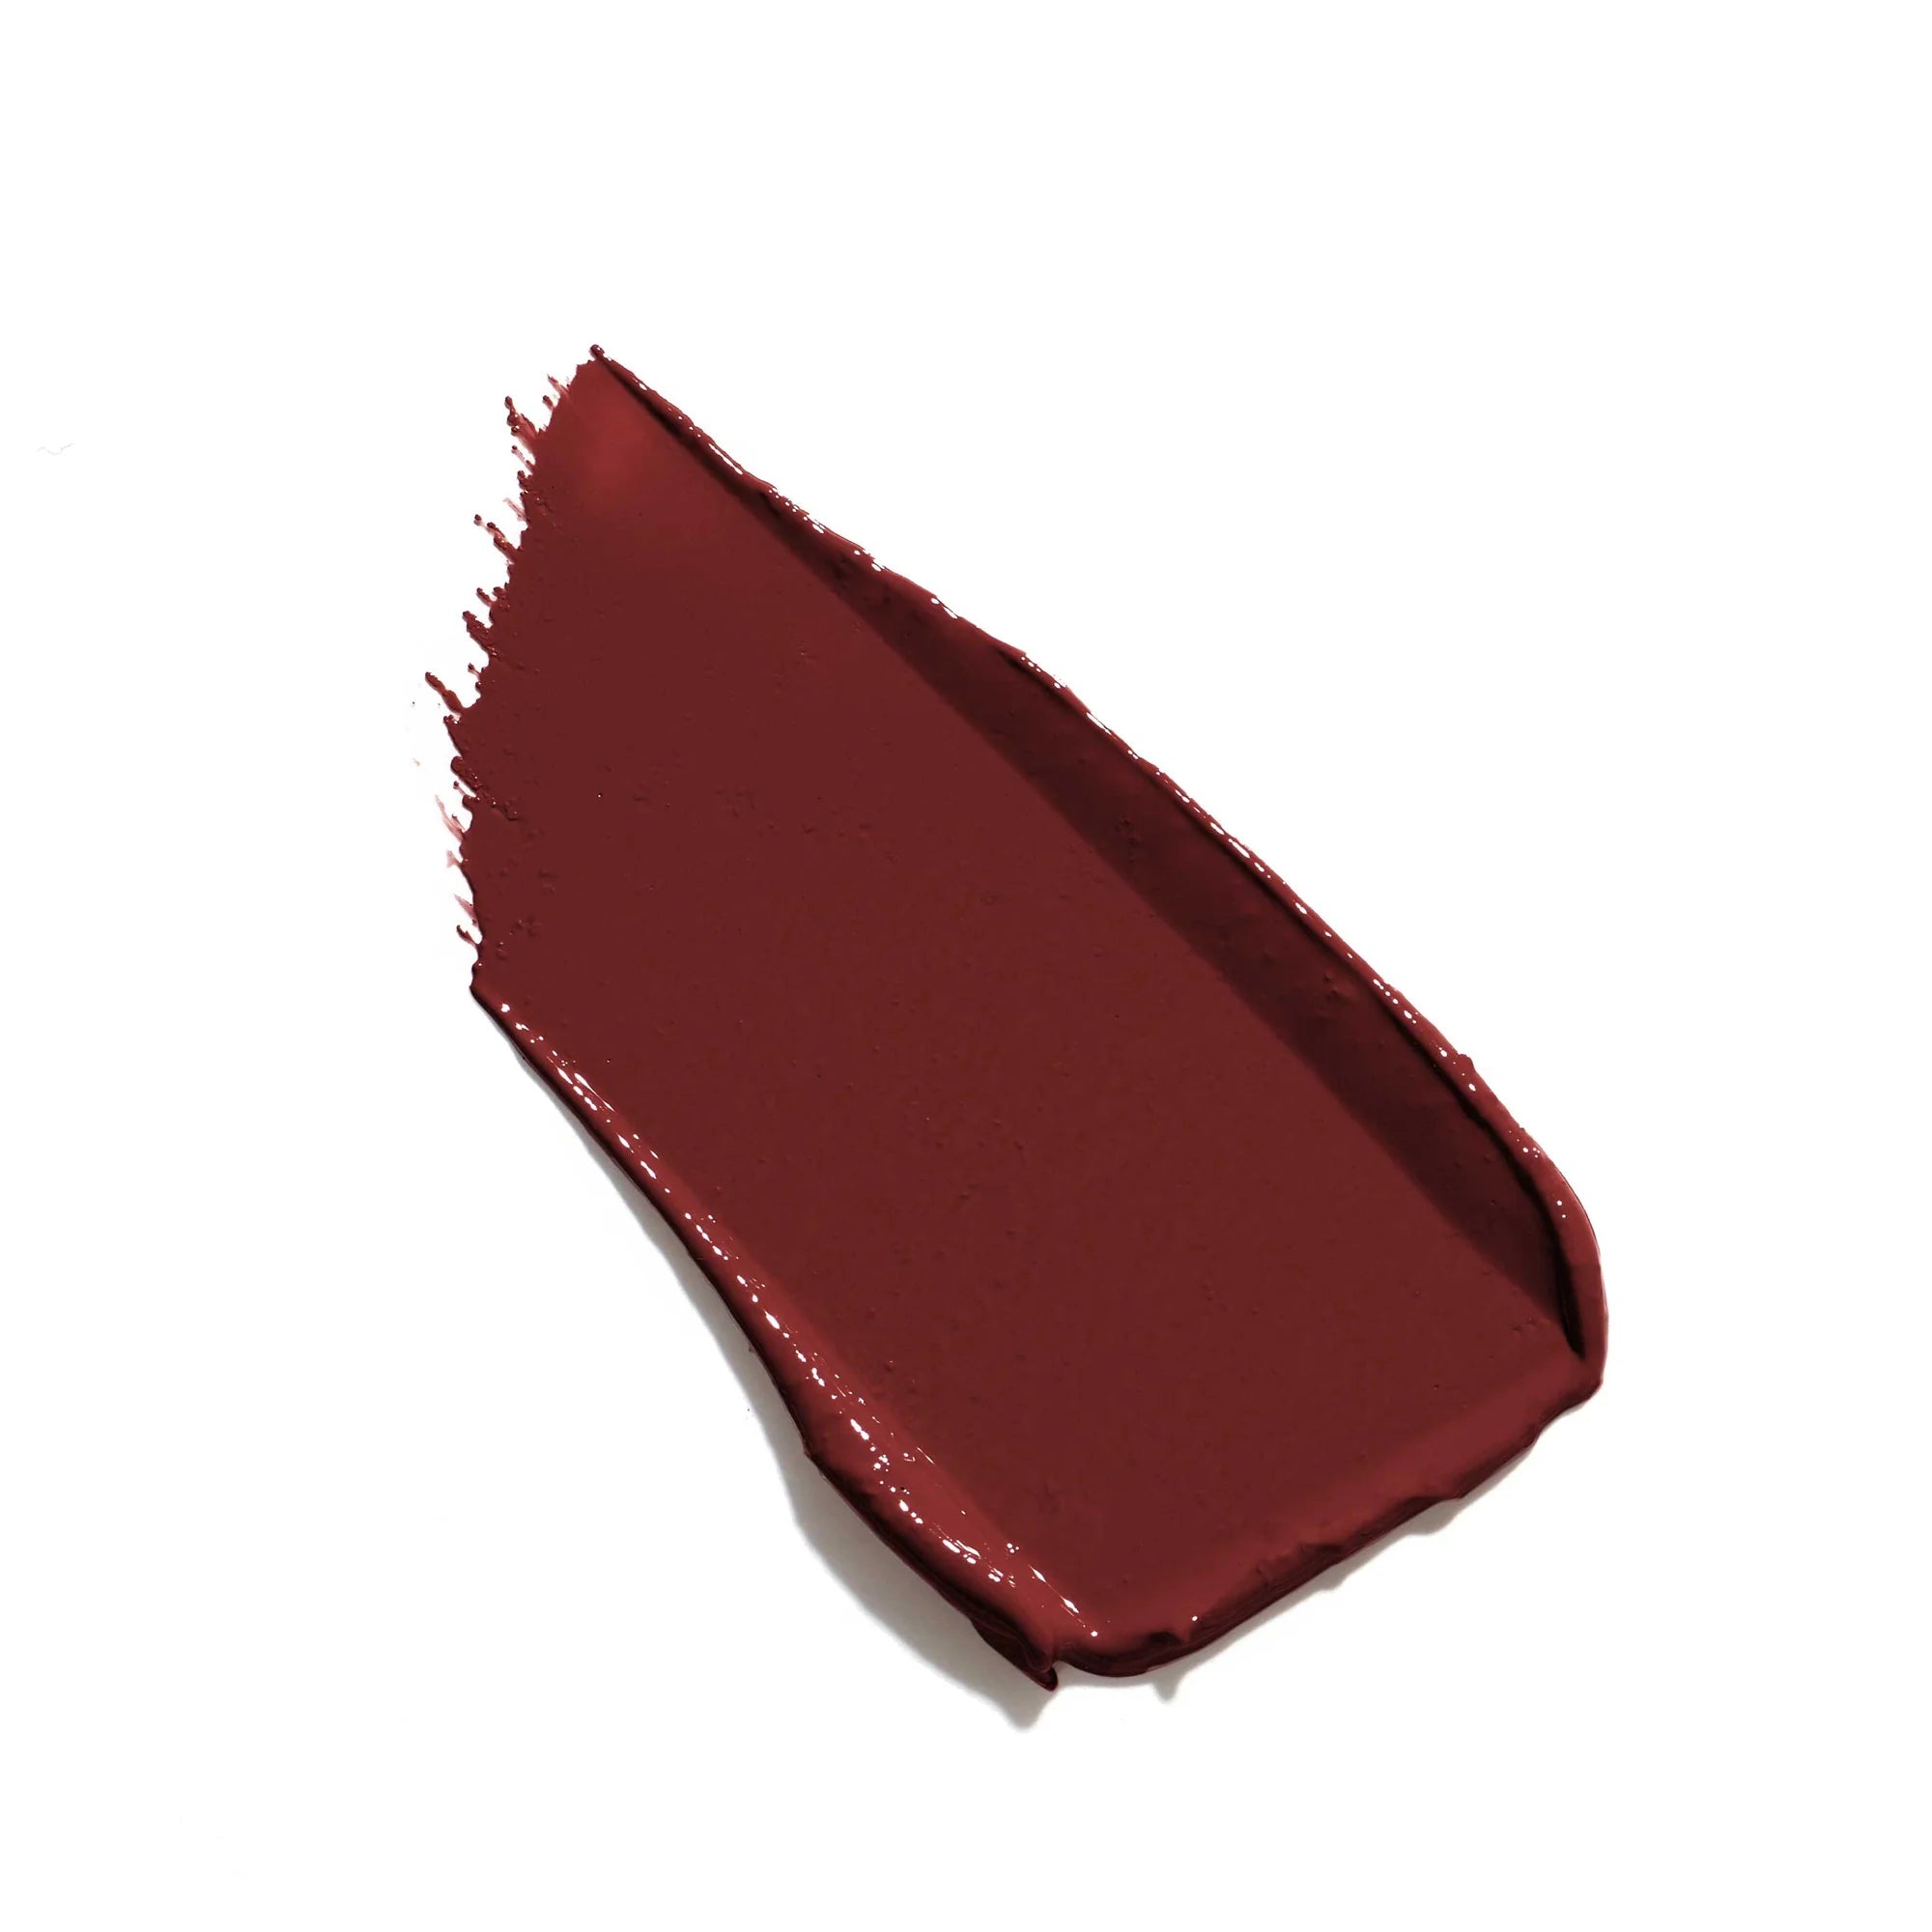 Jane Iredale's ColorLuxe Hydrating Cream Lipstick - swatch and color Bordeaux - warm dark plum